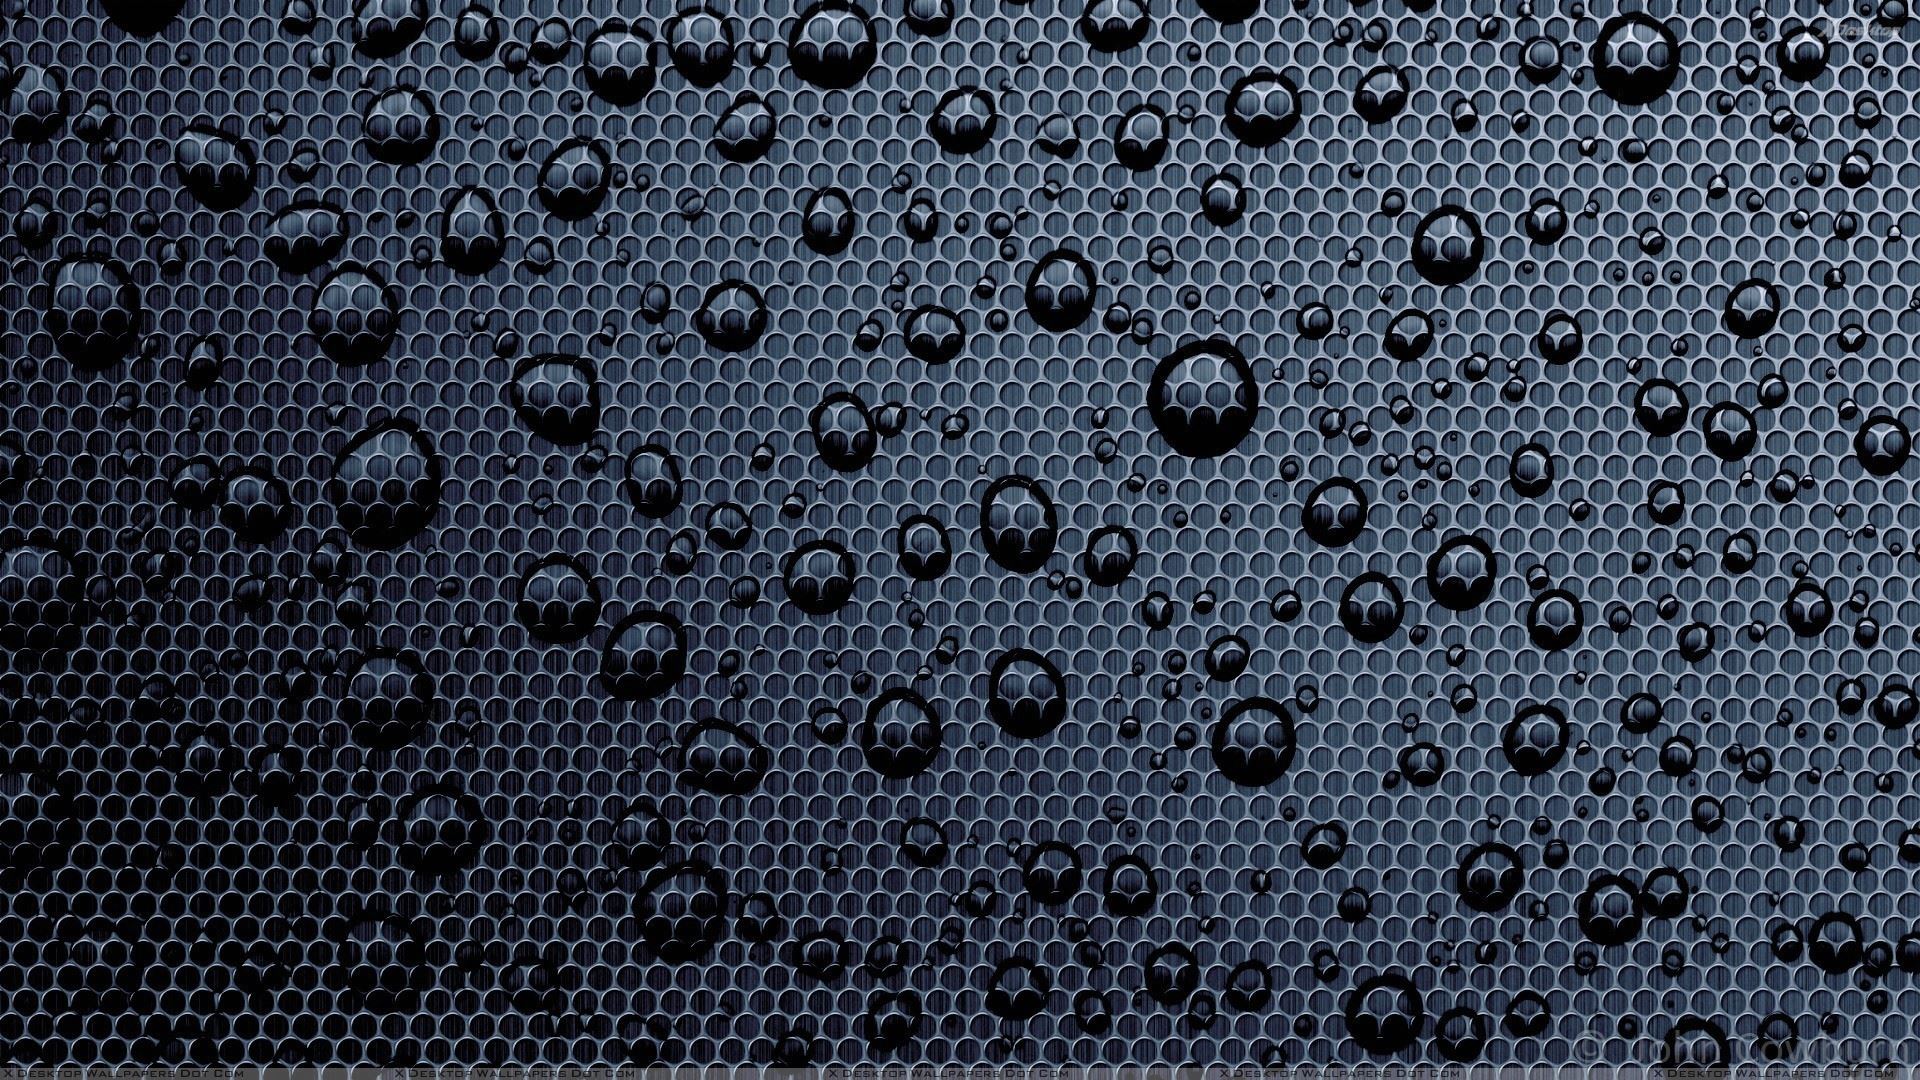 Water Drops On Black Circle Background Wallpaper 1920x1080